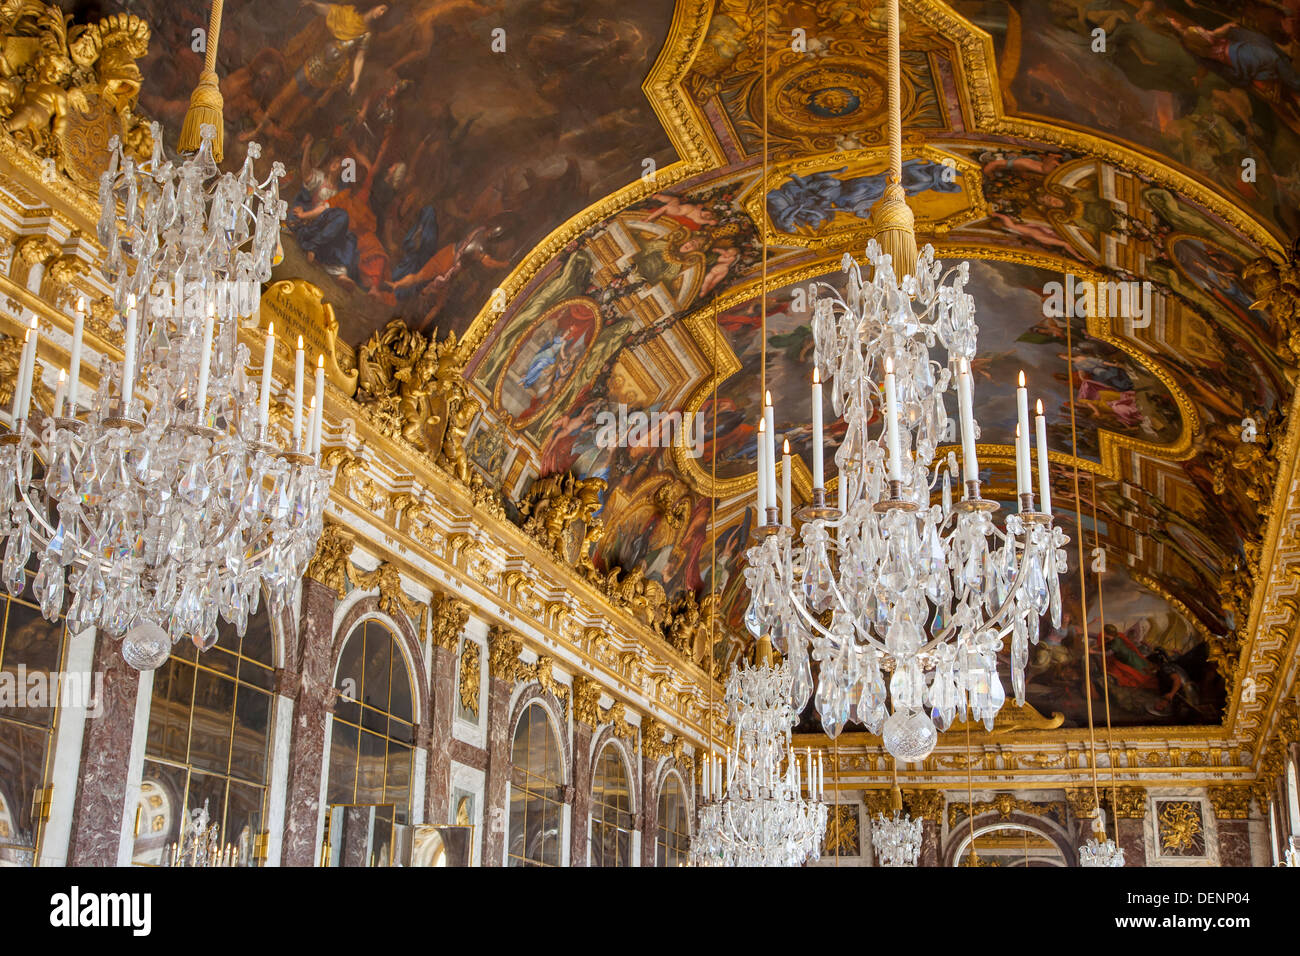 Ceiling And Chandeliers Lustre In The Hall Of Mirrors Cahteau